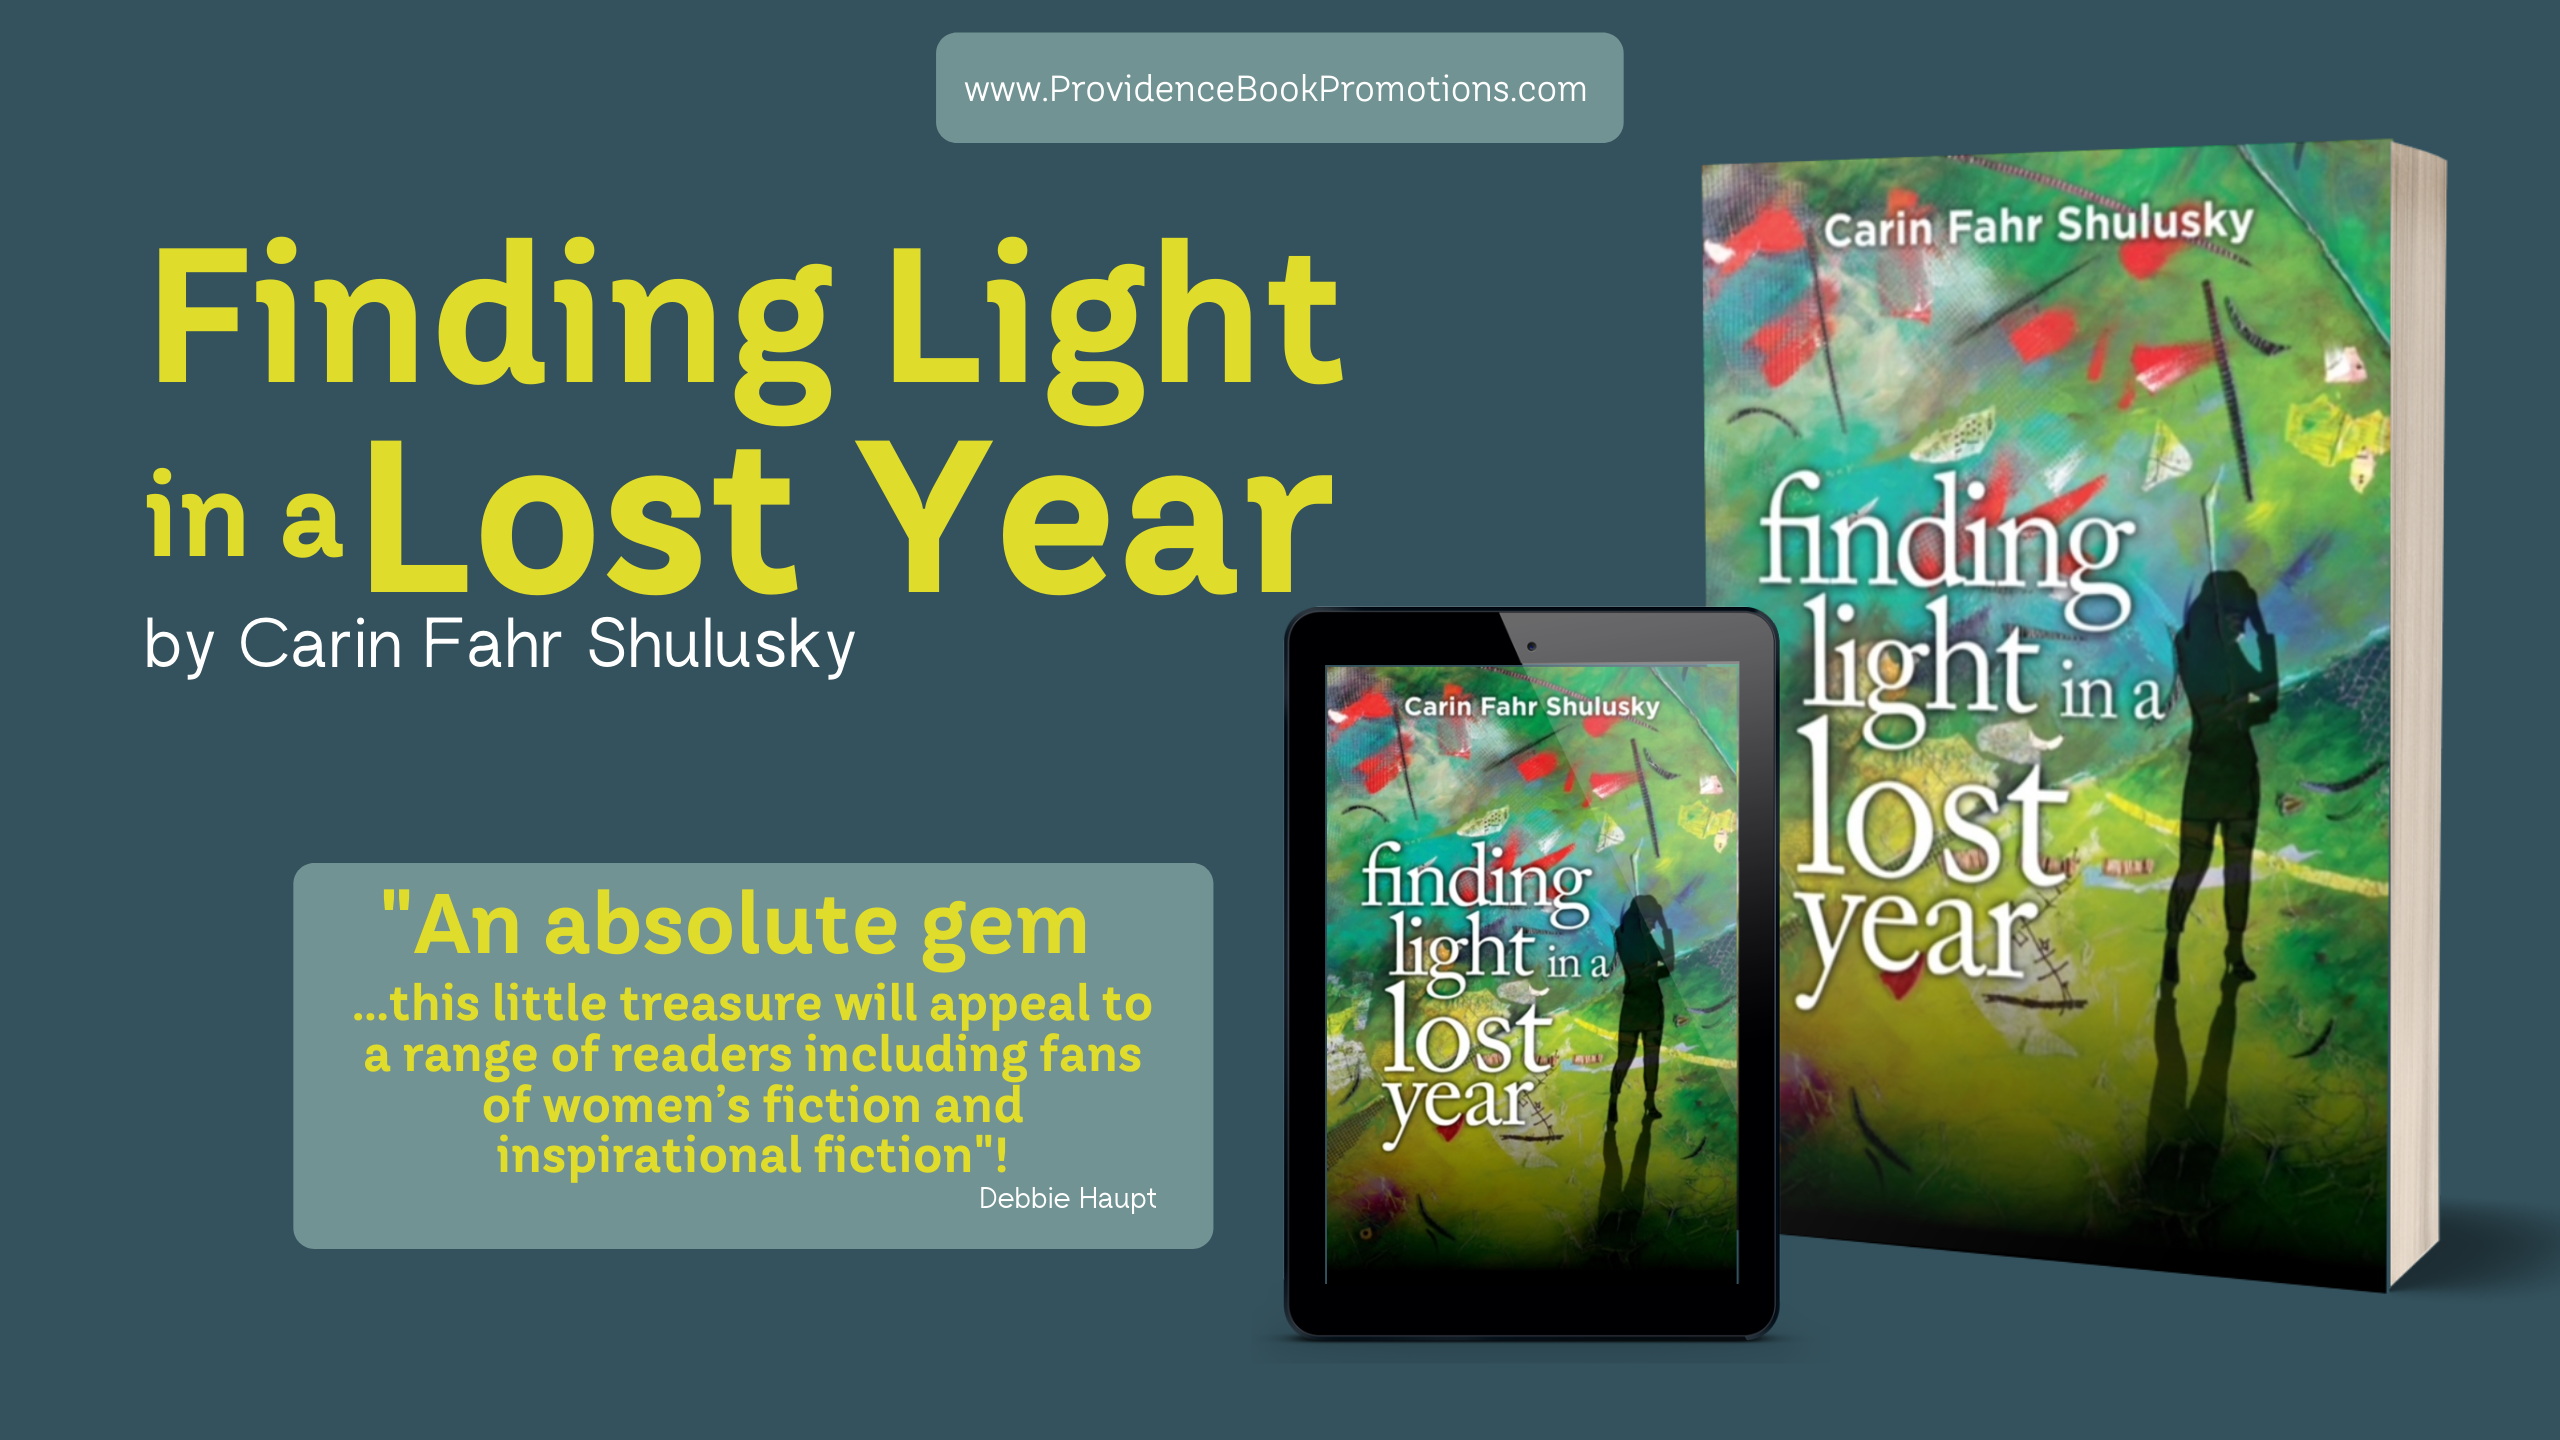 Finding Light in a Lost Year by Carin Fahr Shulusky